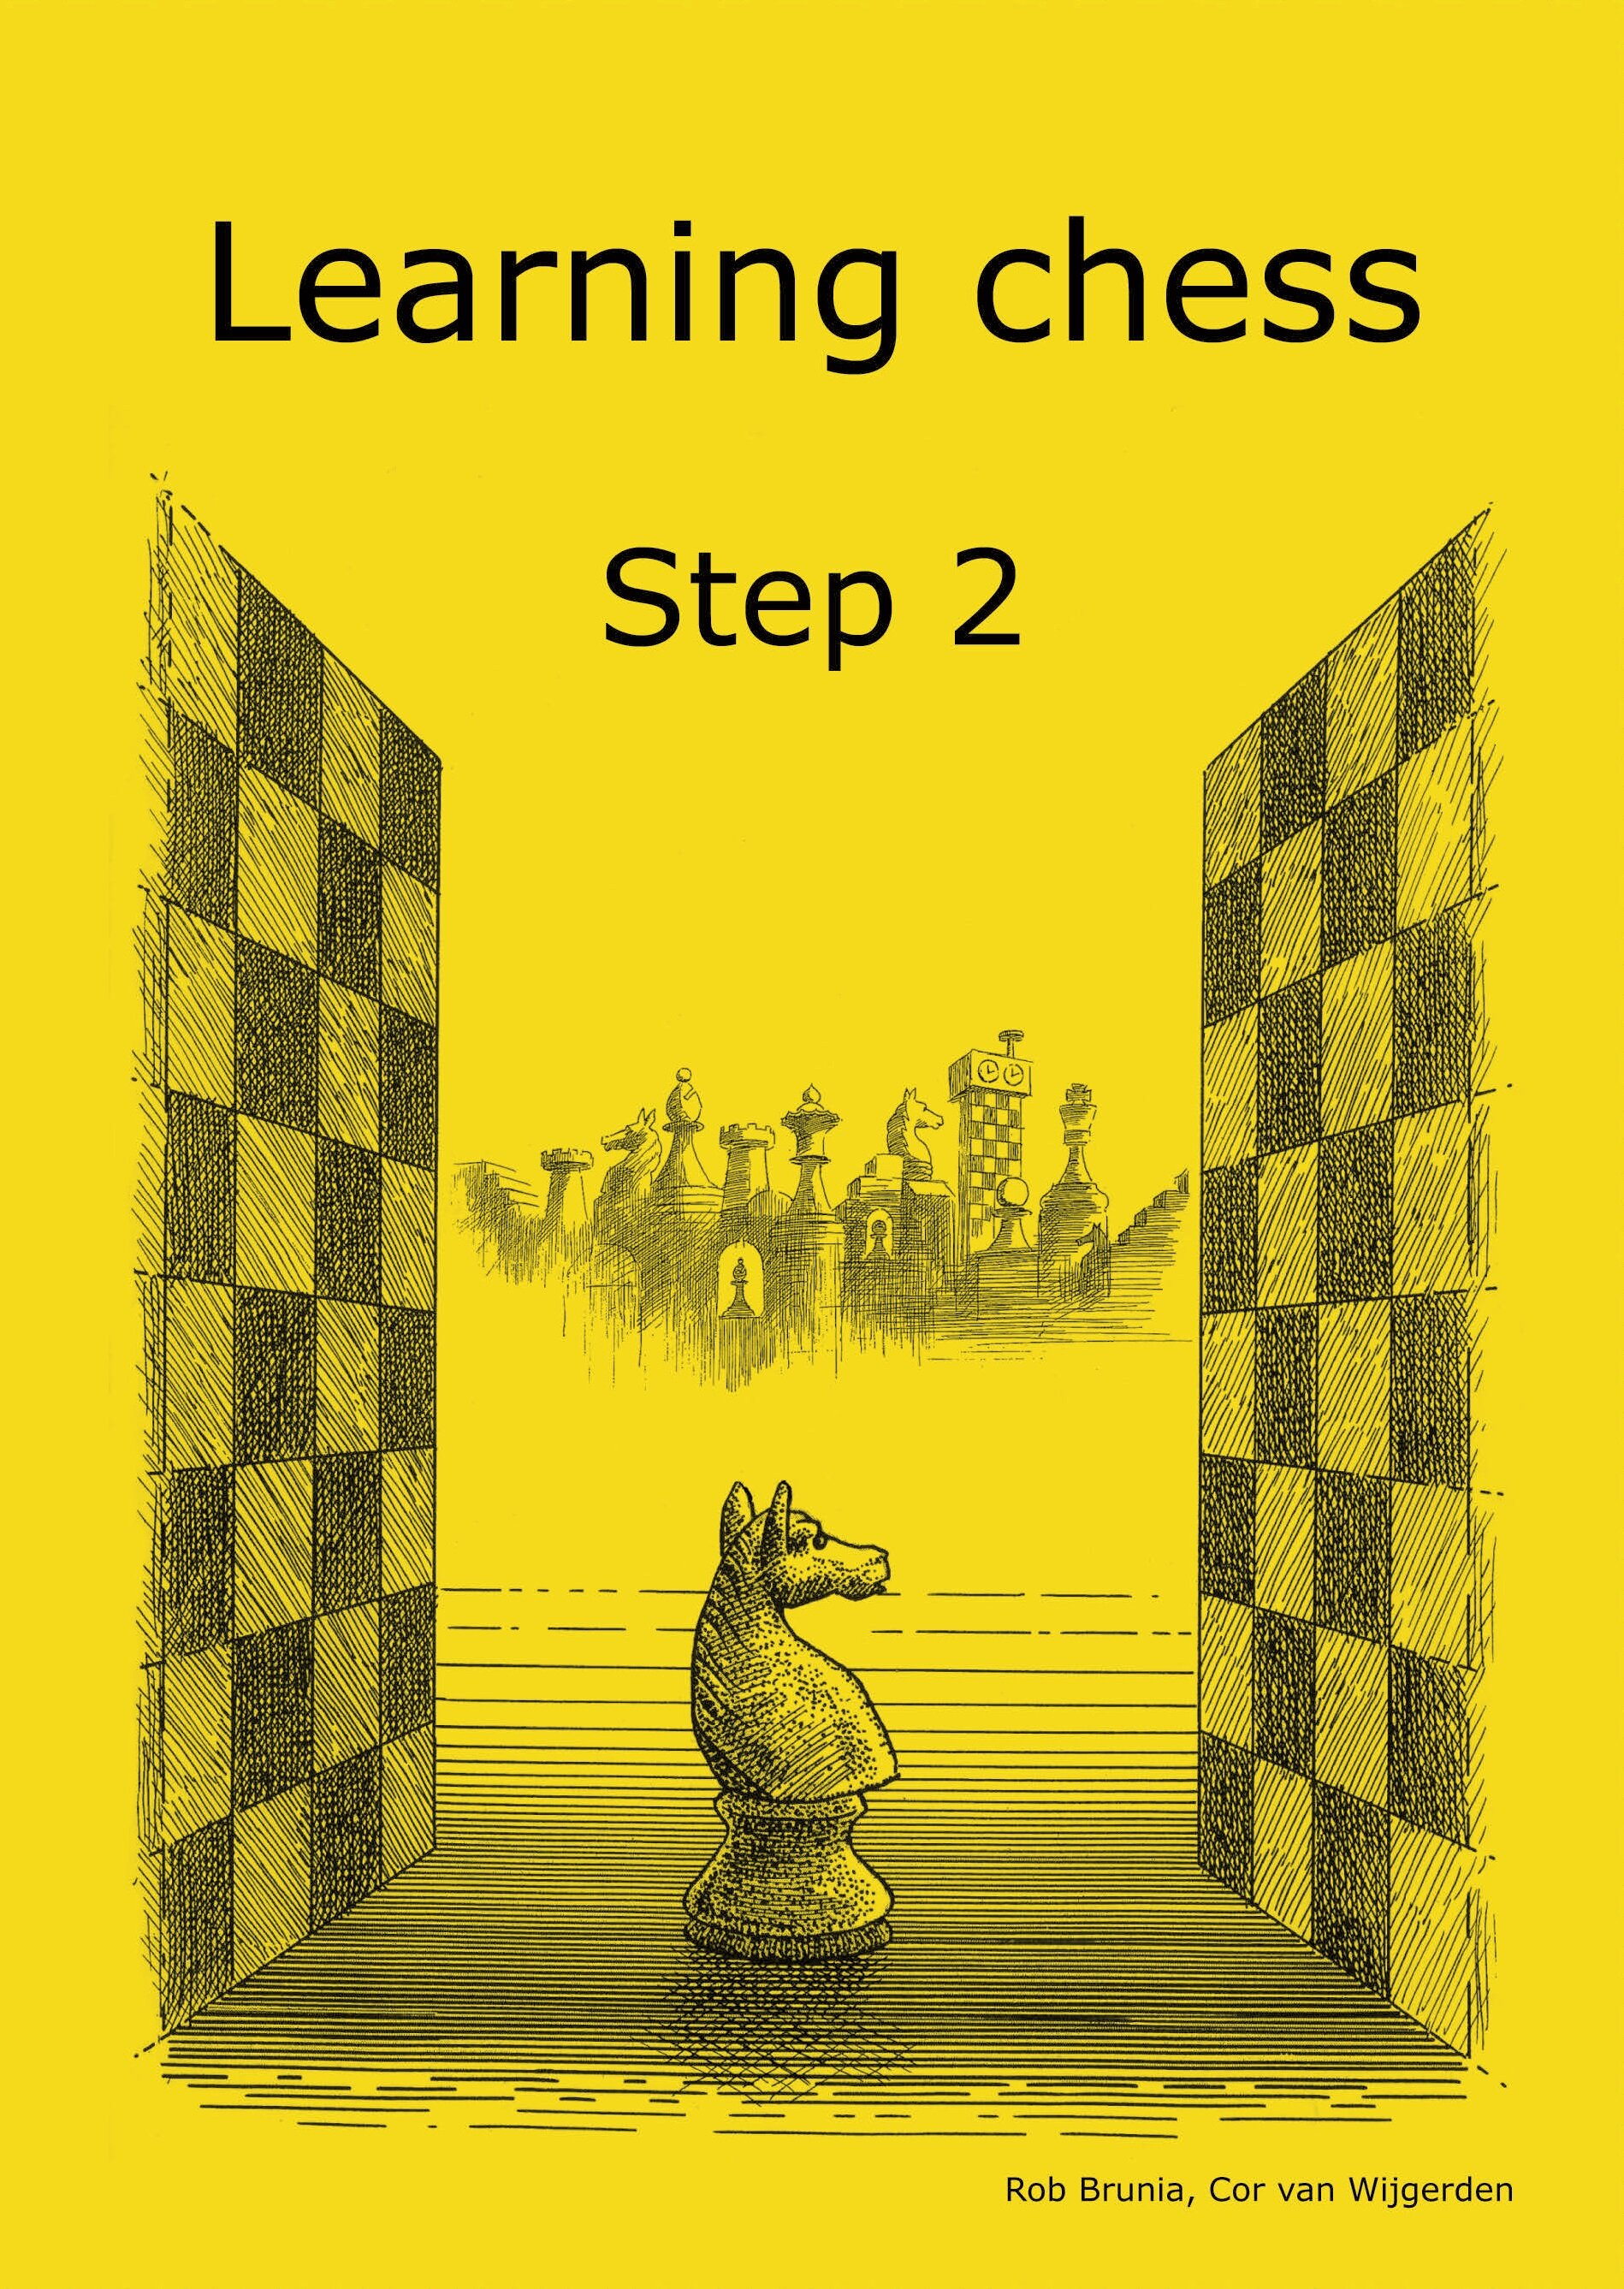 Степ чес. STEPCHESS задачи. Brunia r., van Wijgerden c. Learning Chess. Step 1. Extra. Step by Step 2 book. Thinking ahead